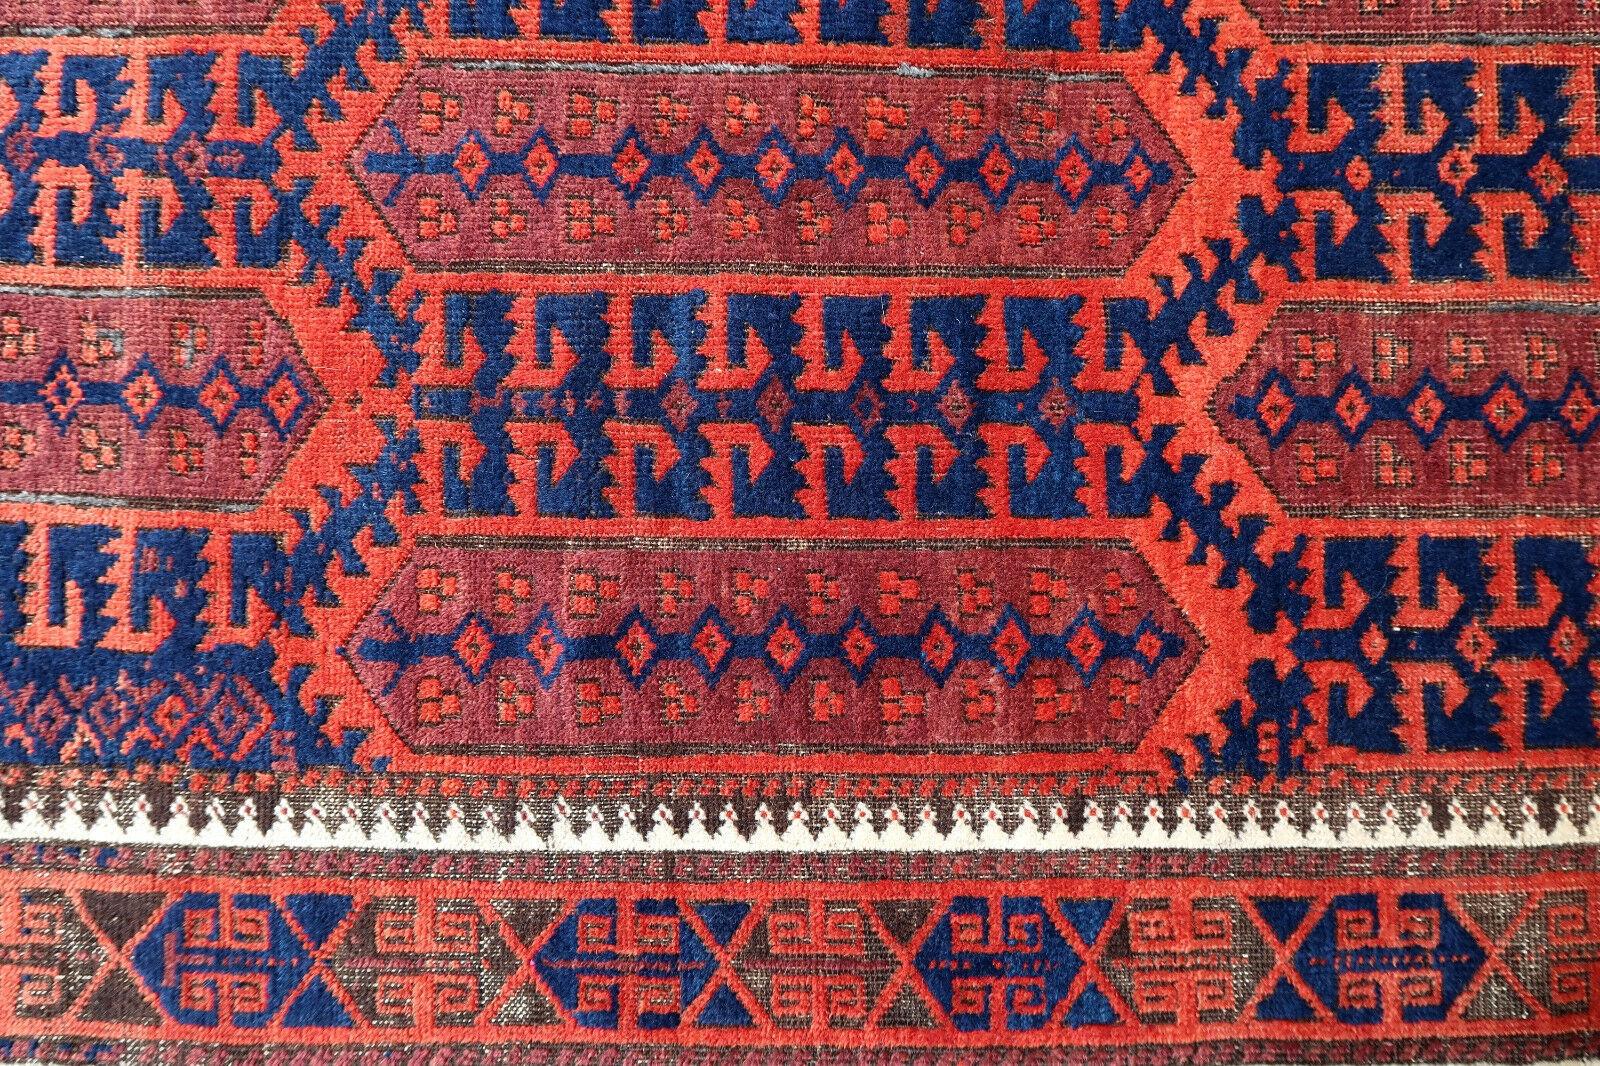 Handmade antique Baluch rug from Afghanistan in original condition, it has some signs of age. The rug is from the beginning of 20th century.

- Condition: Original, some signs of age,

- circa 1900s,

- Size: 2.9' x 5.3' (90cm x 163cm),

-